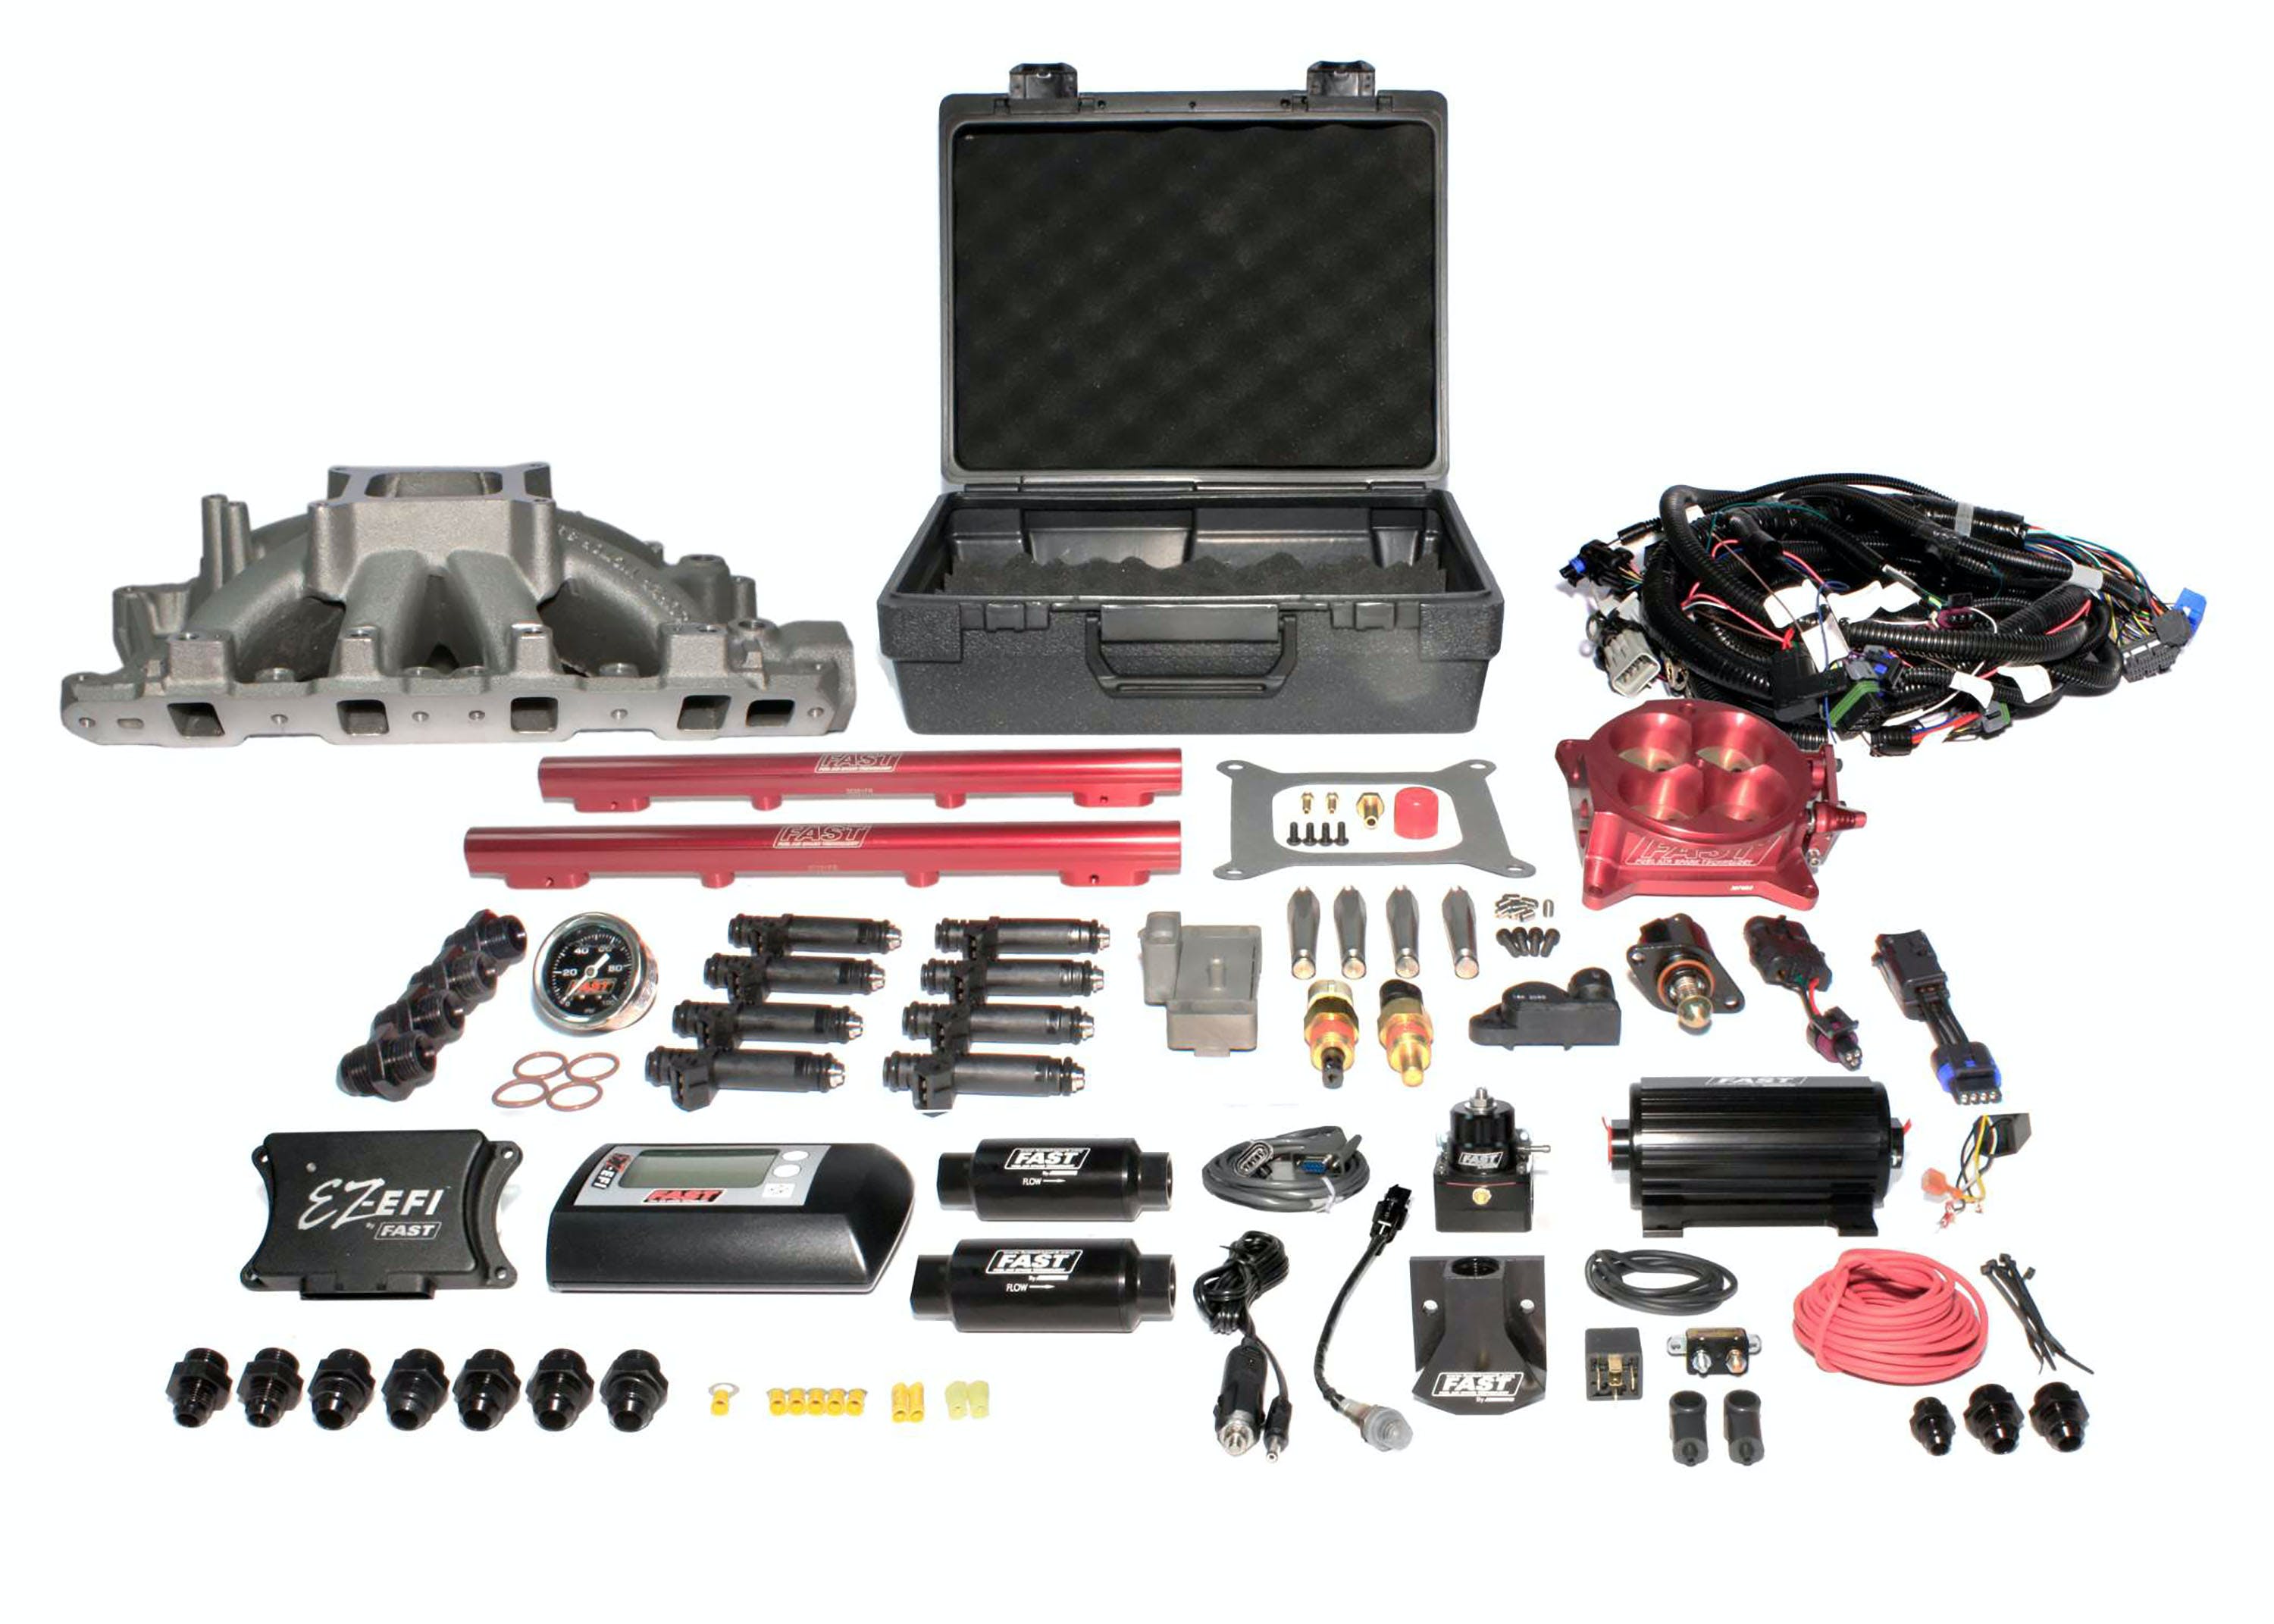 FAST - Fuel Air Spark Technology 3035351-10E EZ EFI Windsor Multiport System w/ Intake, Fuel System and Red Throttle Body